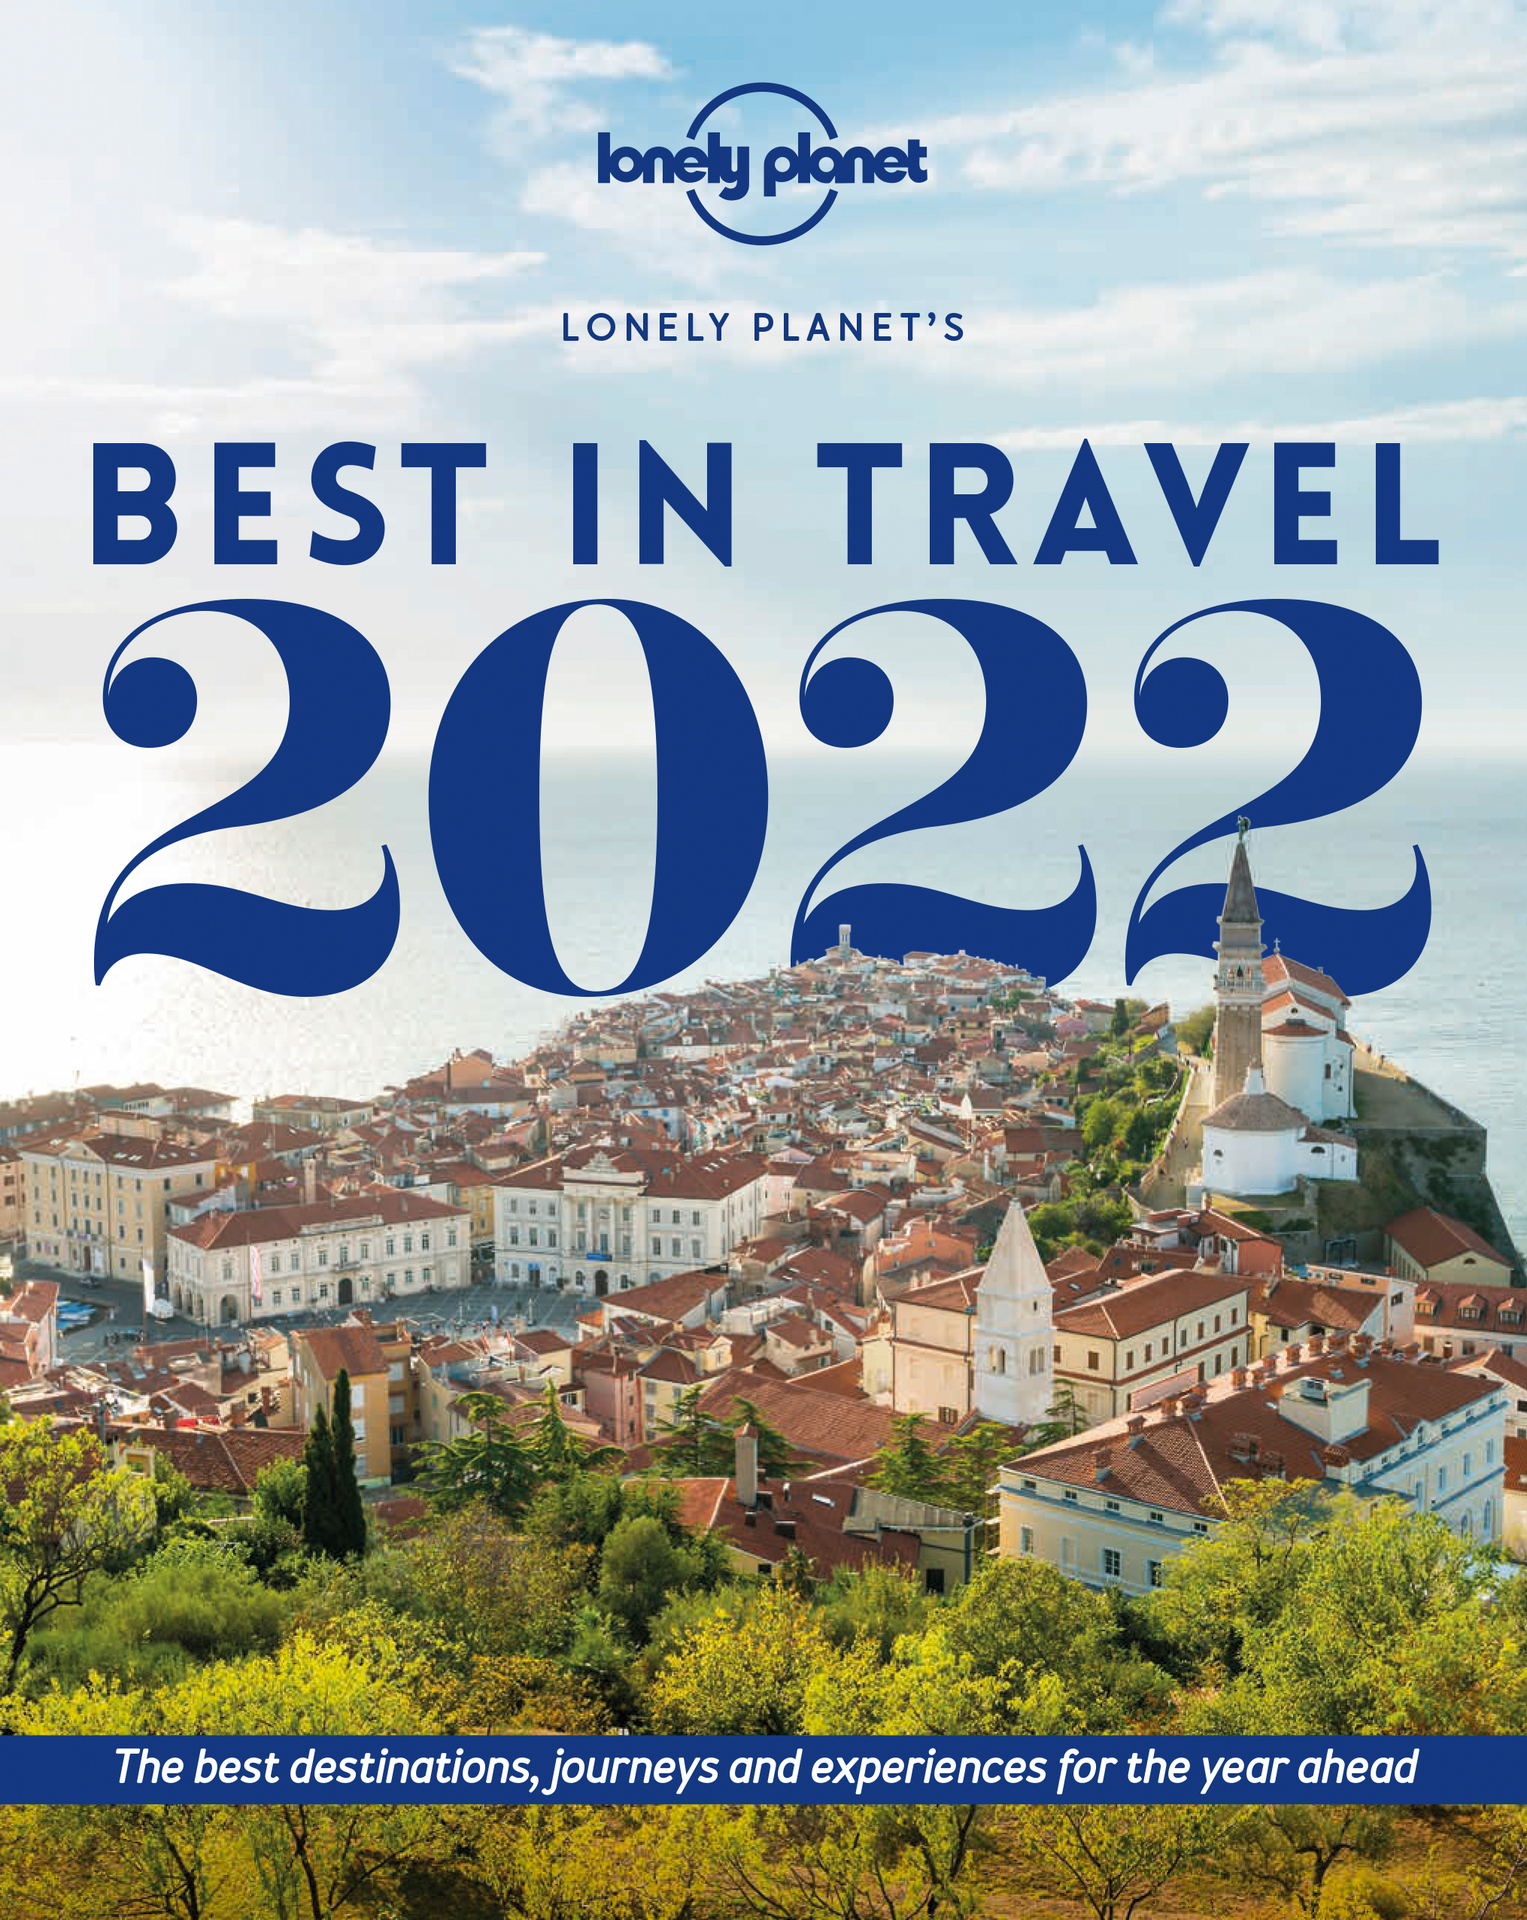 Dallas travel - Lonely Planet